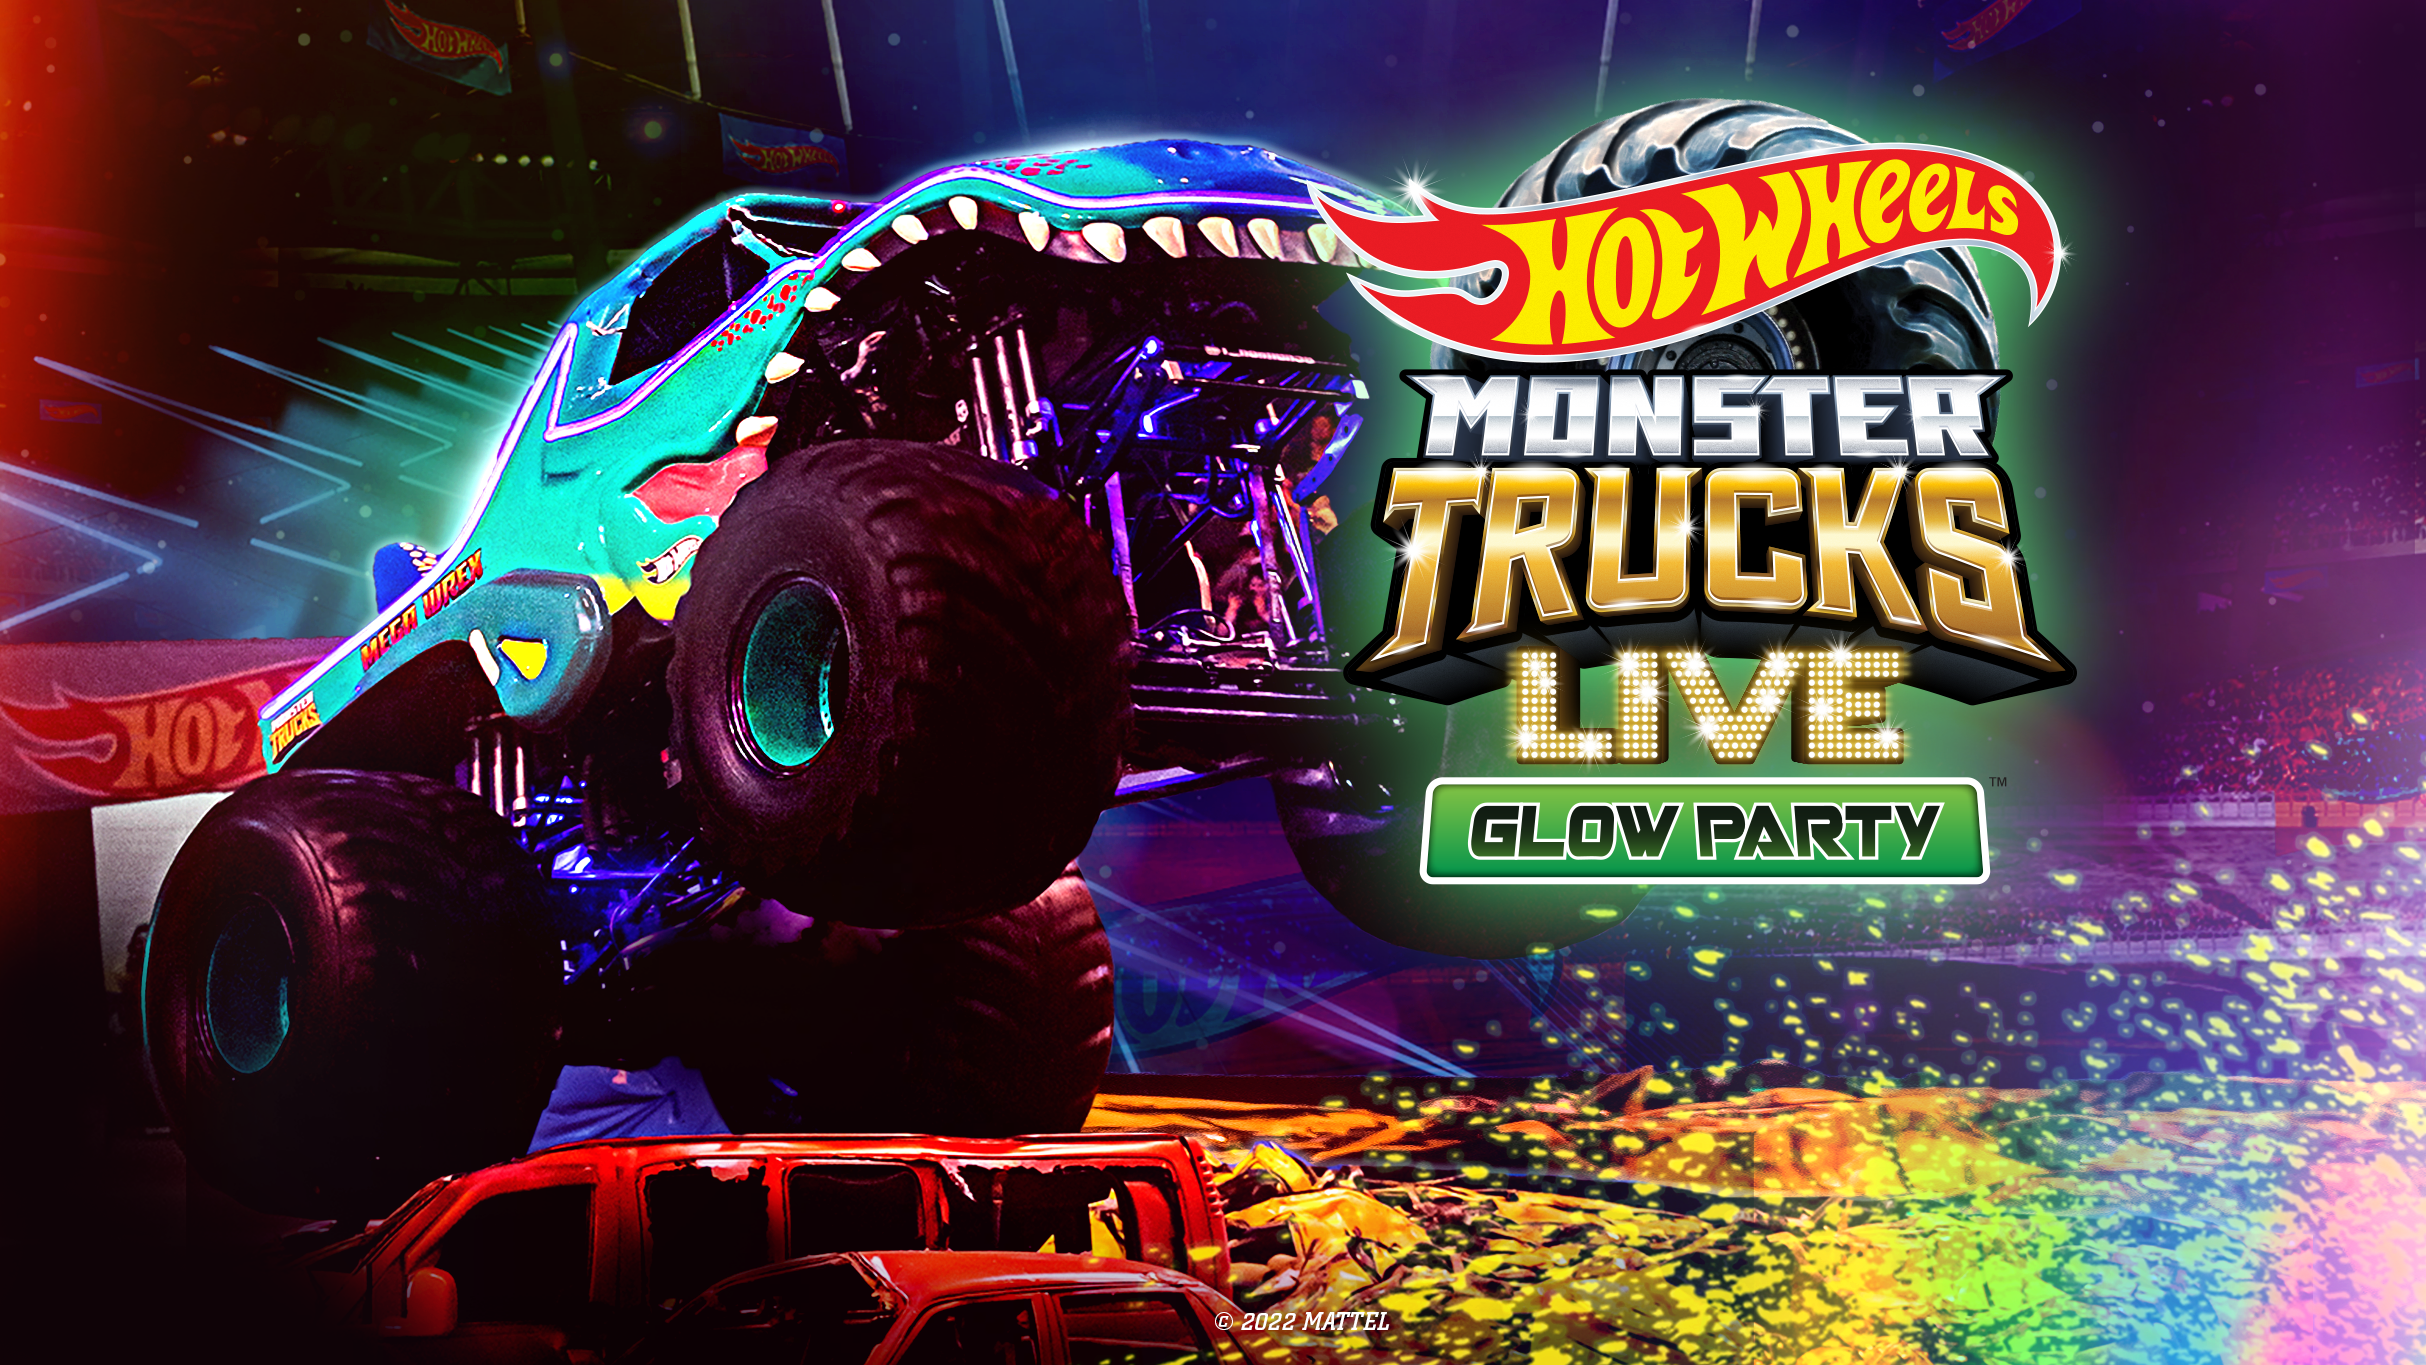 Hot Wheels Monster Trucks Live Glow Party free presale info for show tickets in Brooklyn, NY (Barclays Center)